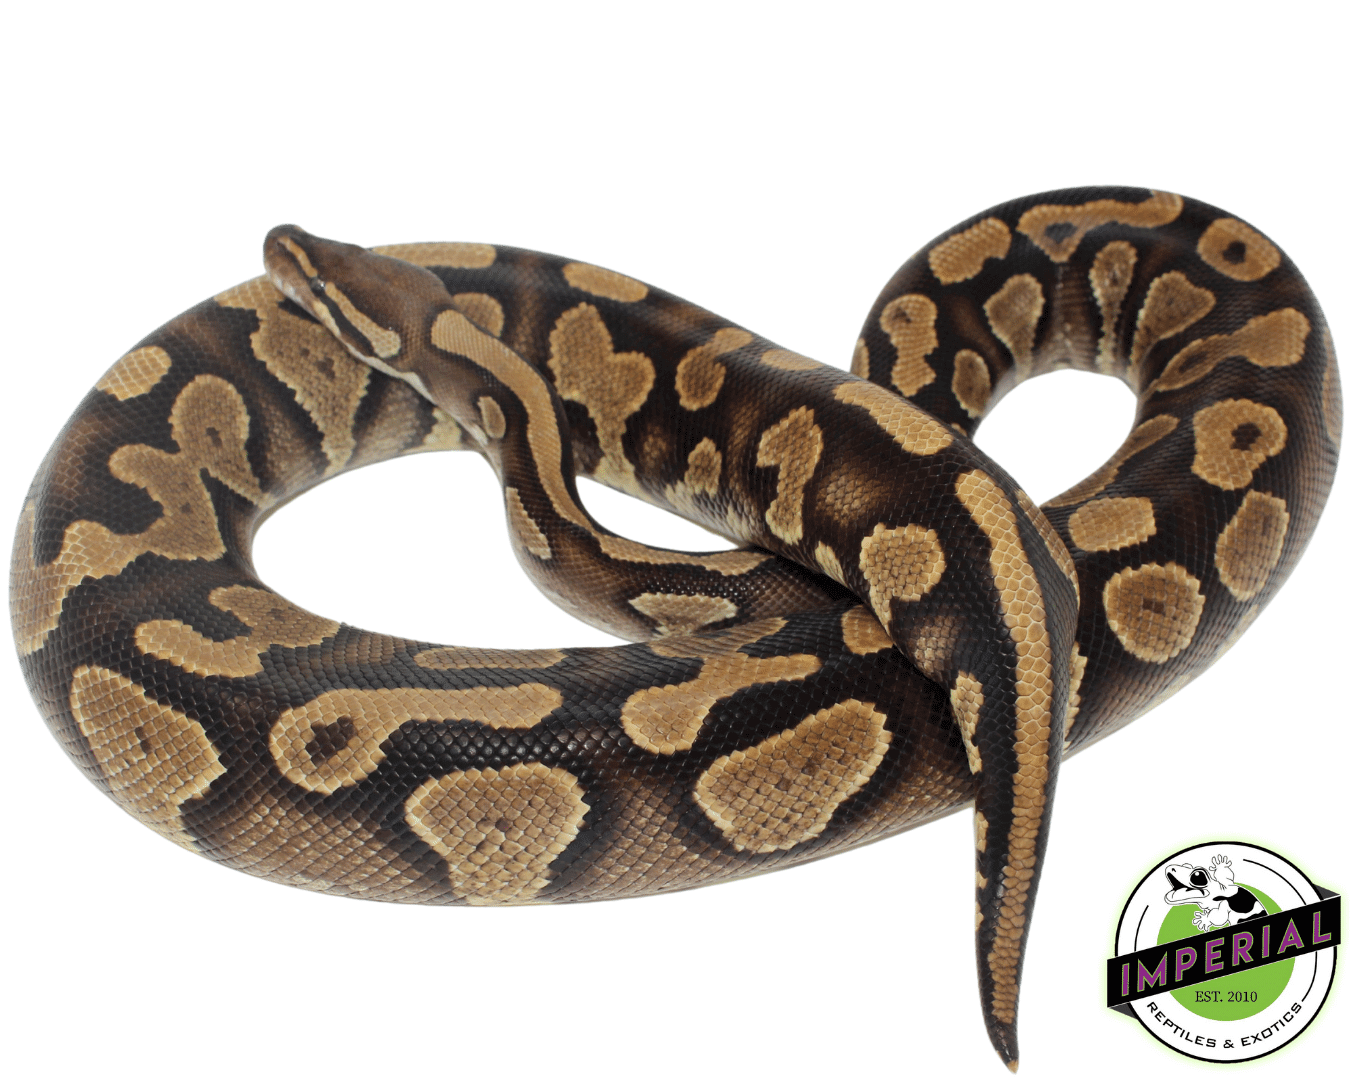 yellowbelly ball python for sale, buy reptiles online